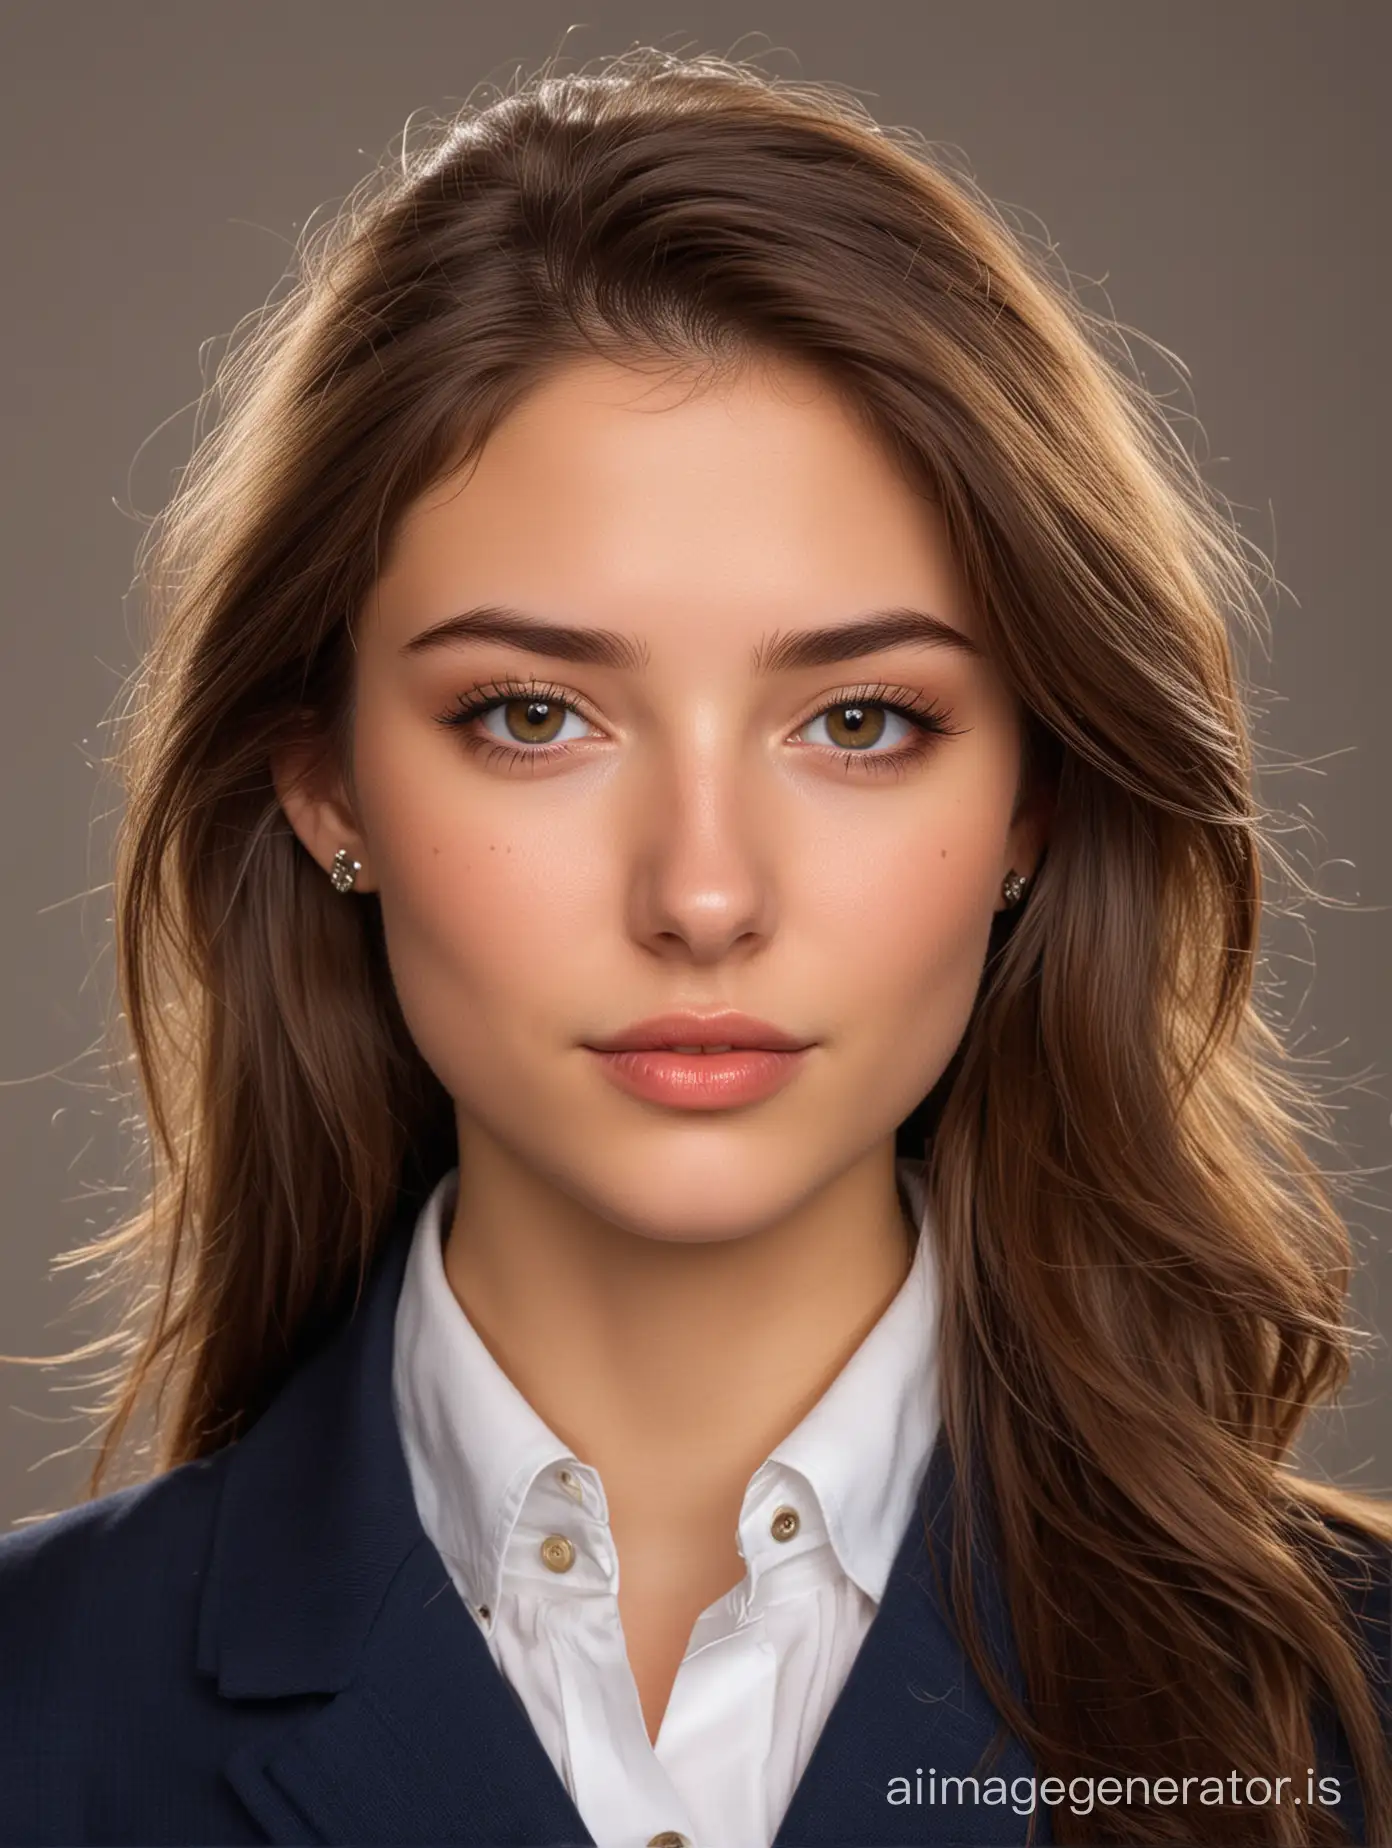 A charming 16-year-old girl in a business suit, dark blue, white shirt with buttons undone. Thin, straight nose, plump lips, 'Fox' eyes with long eyelashes, and brown eye color. She has earrings with a nail design, a European facial feature, and a small dark mole above her lip. Her hair is long, wavy, and light brown. She is attractive and sexy, a leader with a cheerful demeanor. The photo is for publication on a social network avatar with a light-colored background of a study and at a 3/4 angle. The effects should appear as realistic as possible with minor imperfections and not like Photoshop.